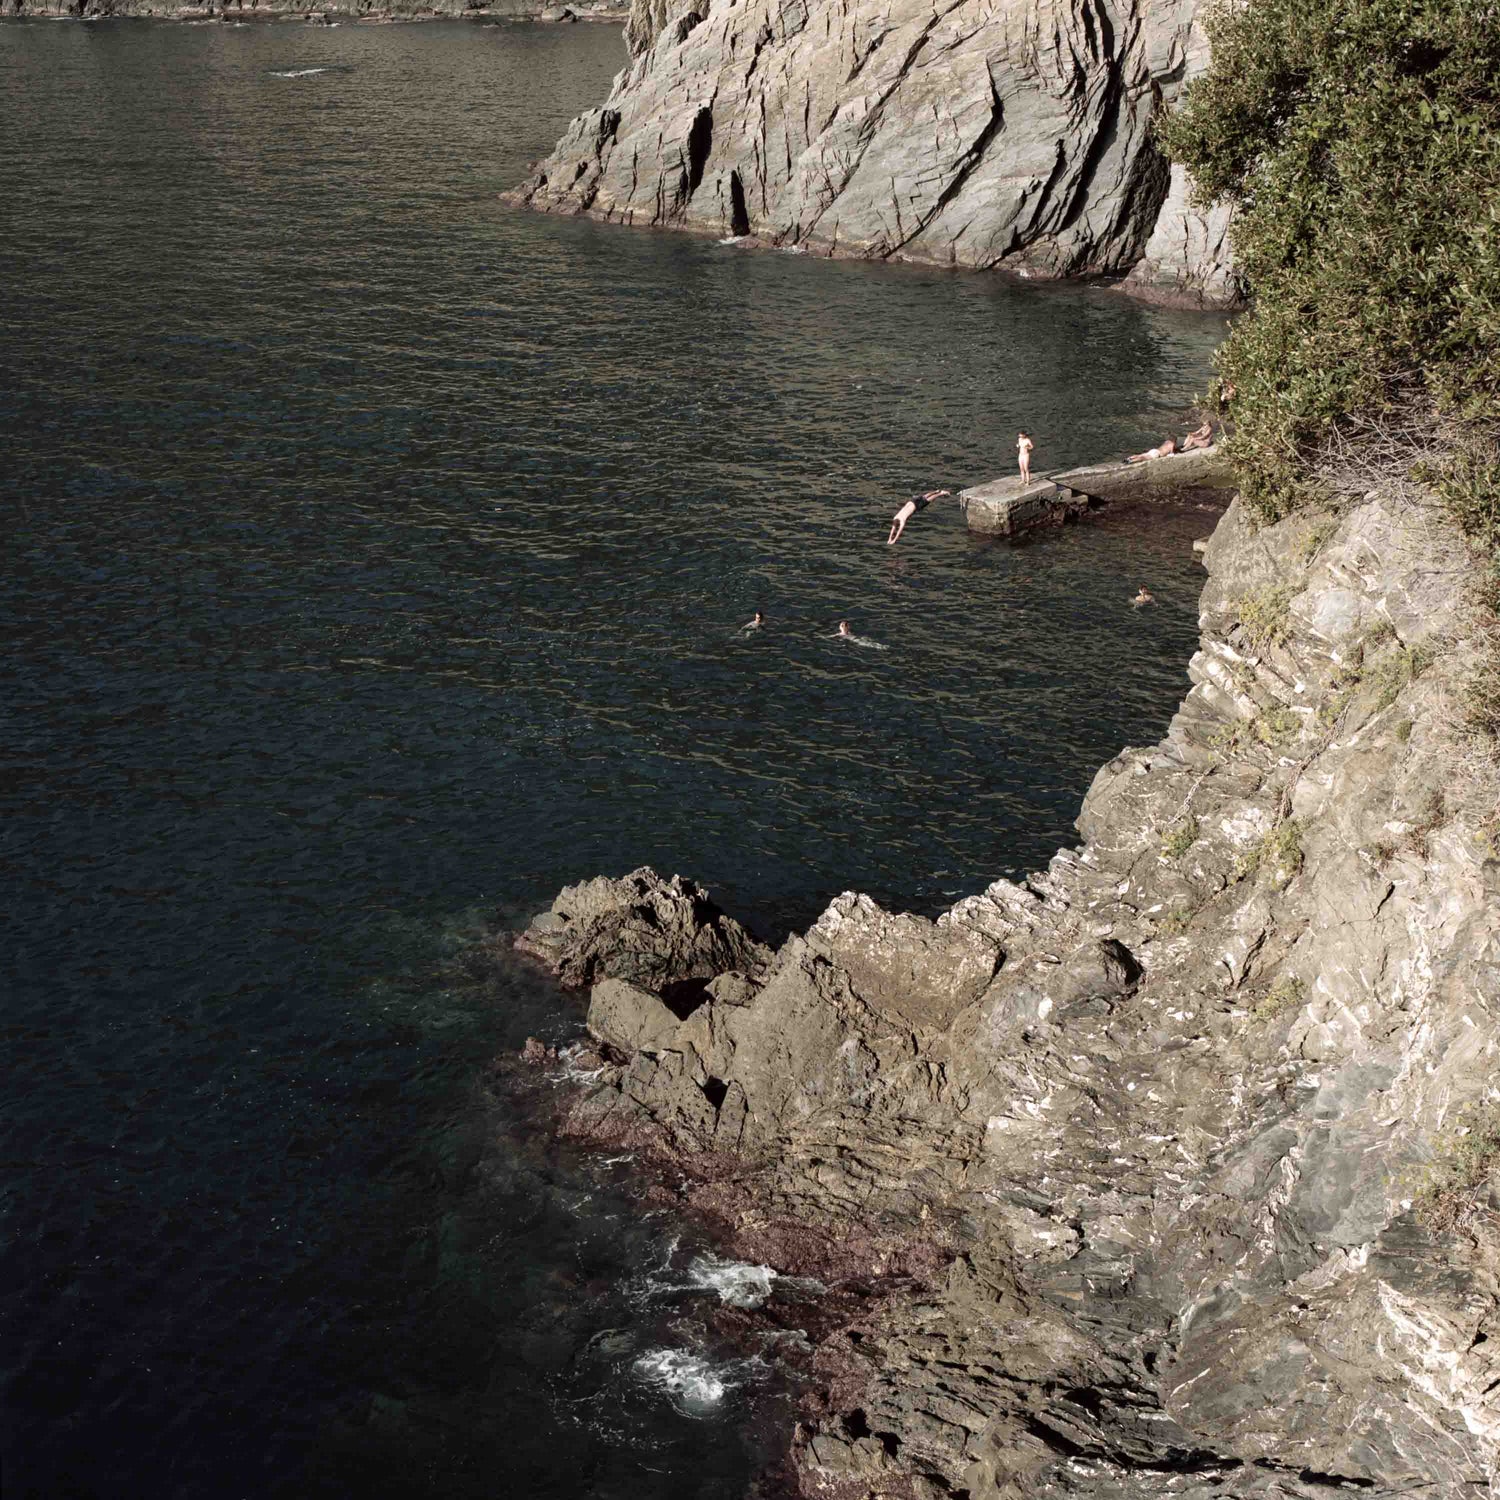 Cliffs in Italy with a man diving in the ocean